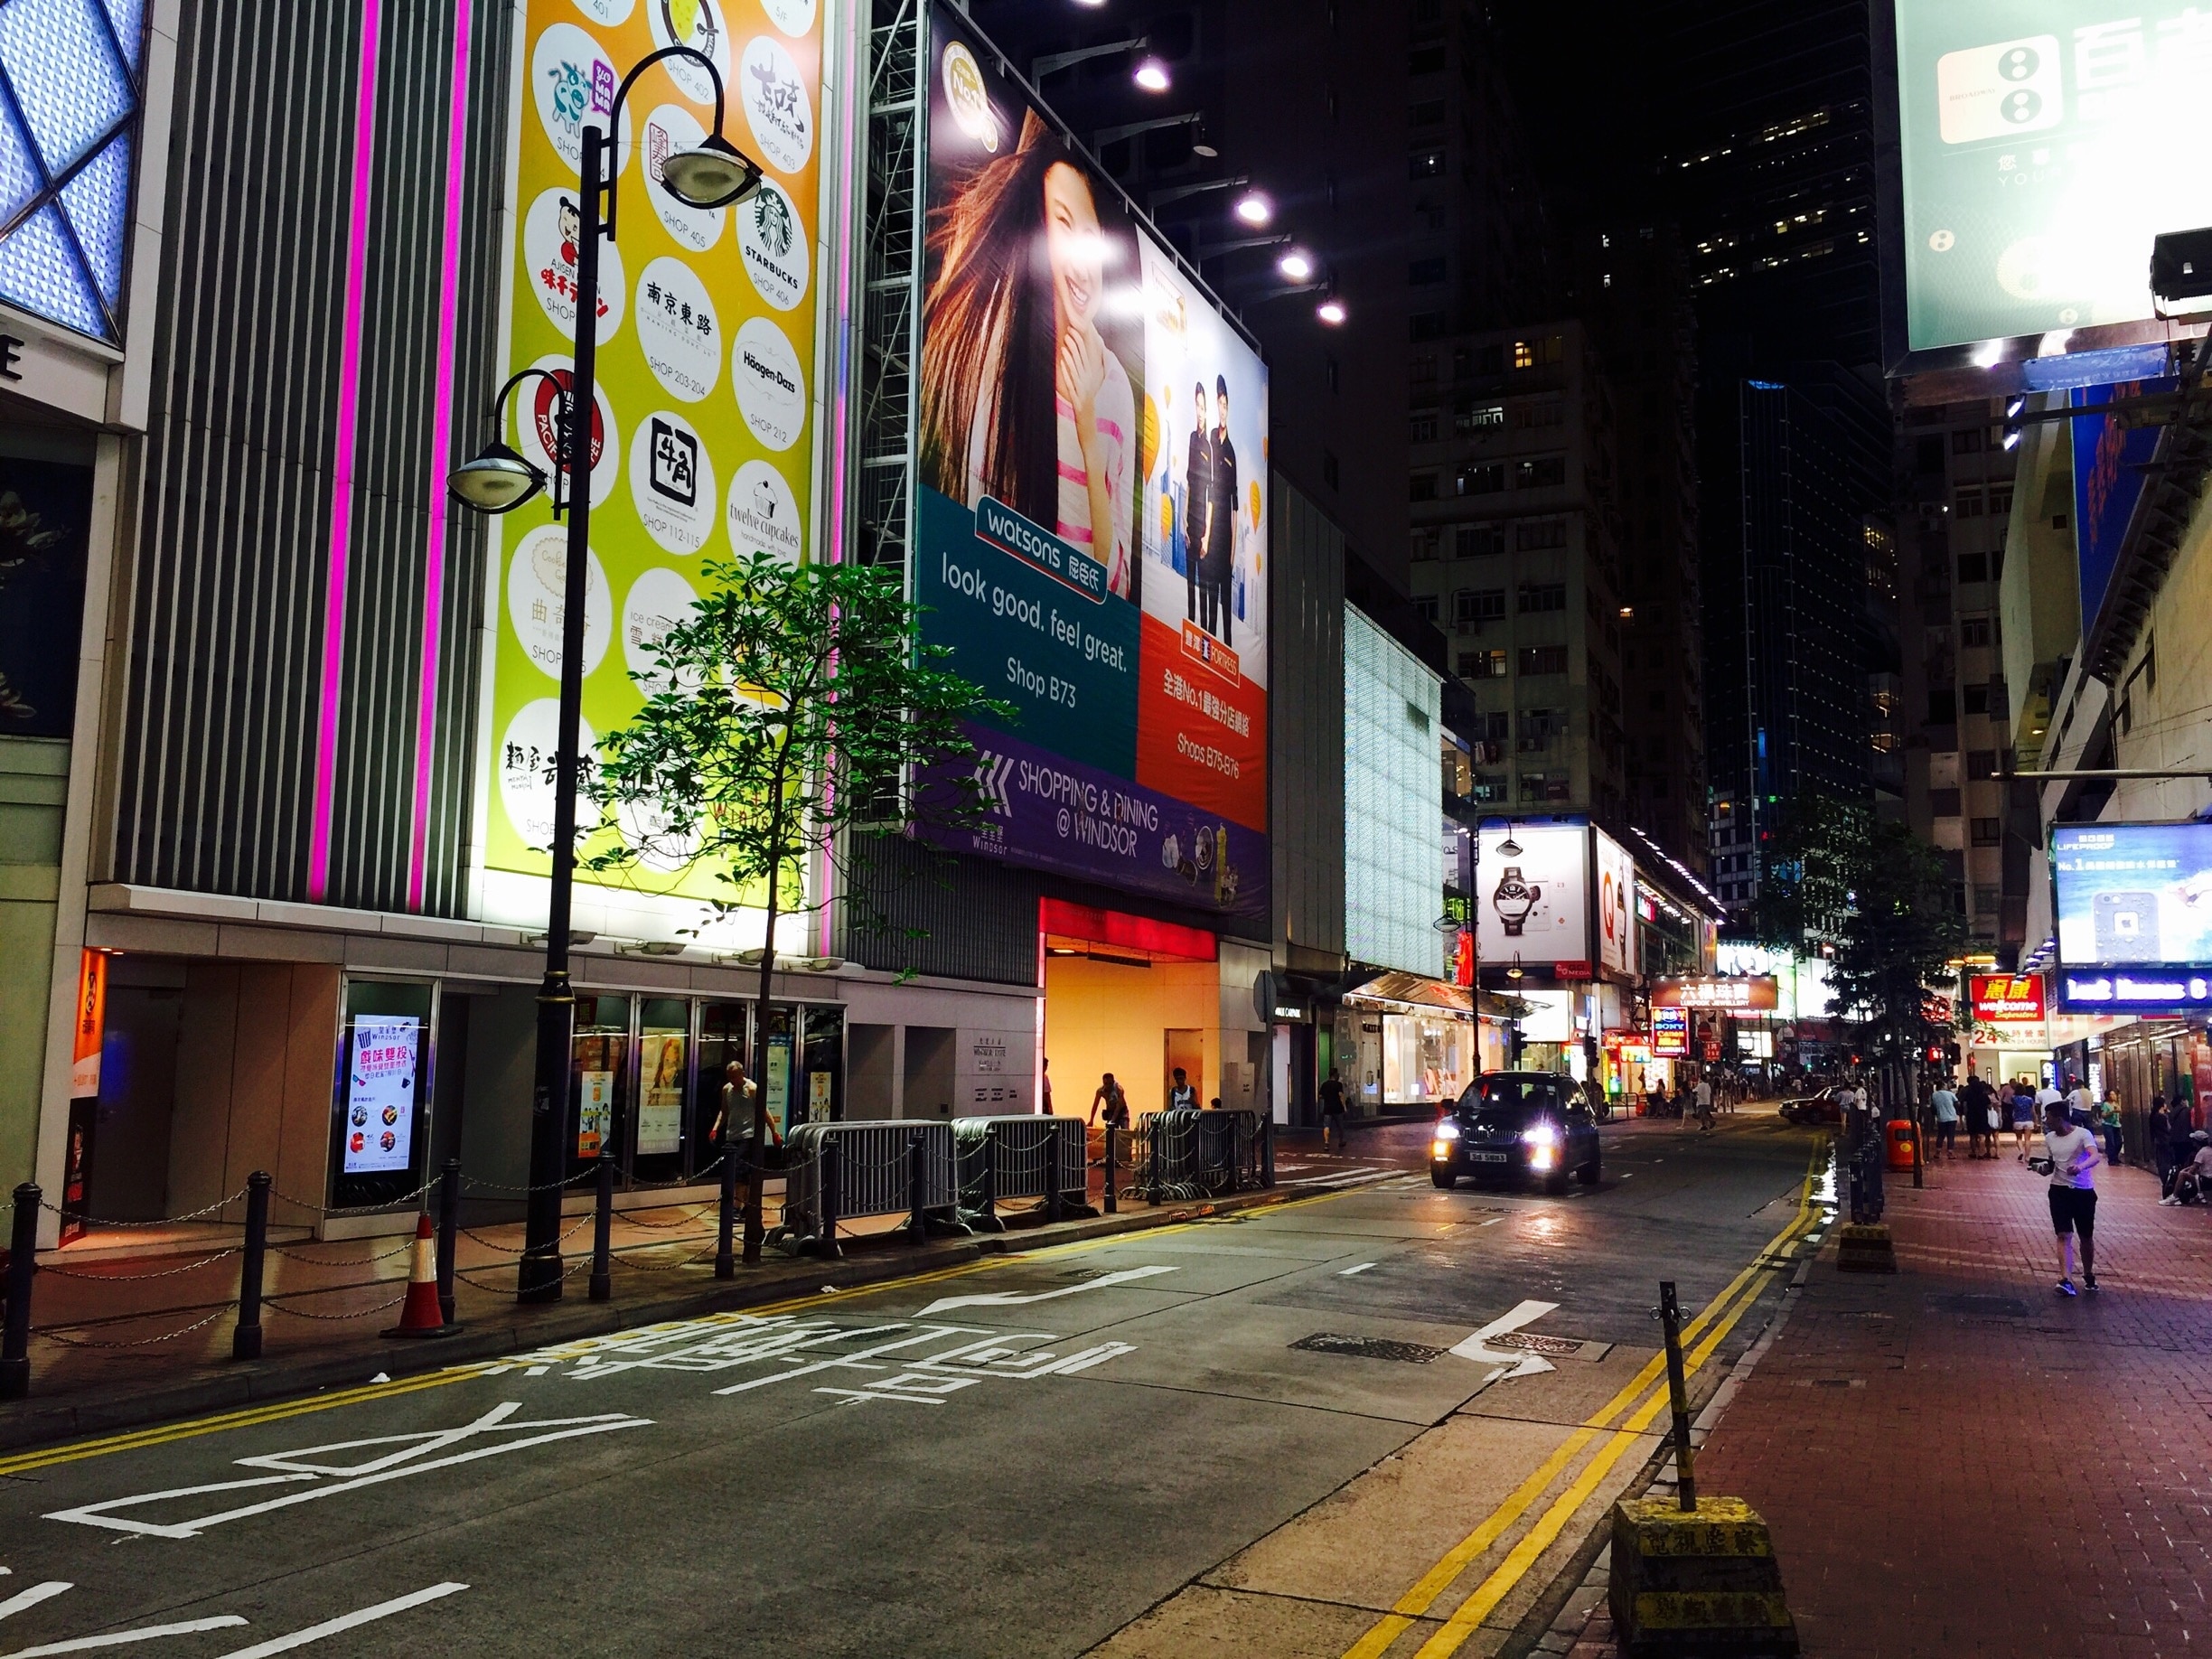 Causeway Bay is one of famous tourist shopping area in Hong Kong.  Due to the high rental rate, some shops open til 11:00pm or even 24 hours each day.  You can easily buy your necessities even you get home late. 